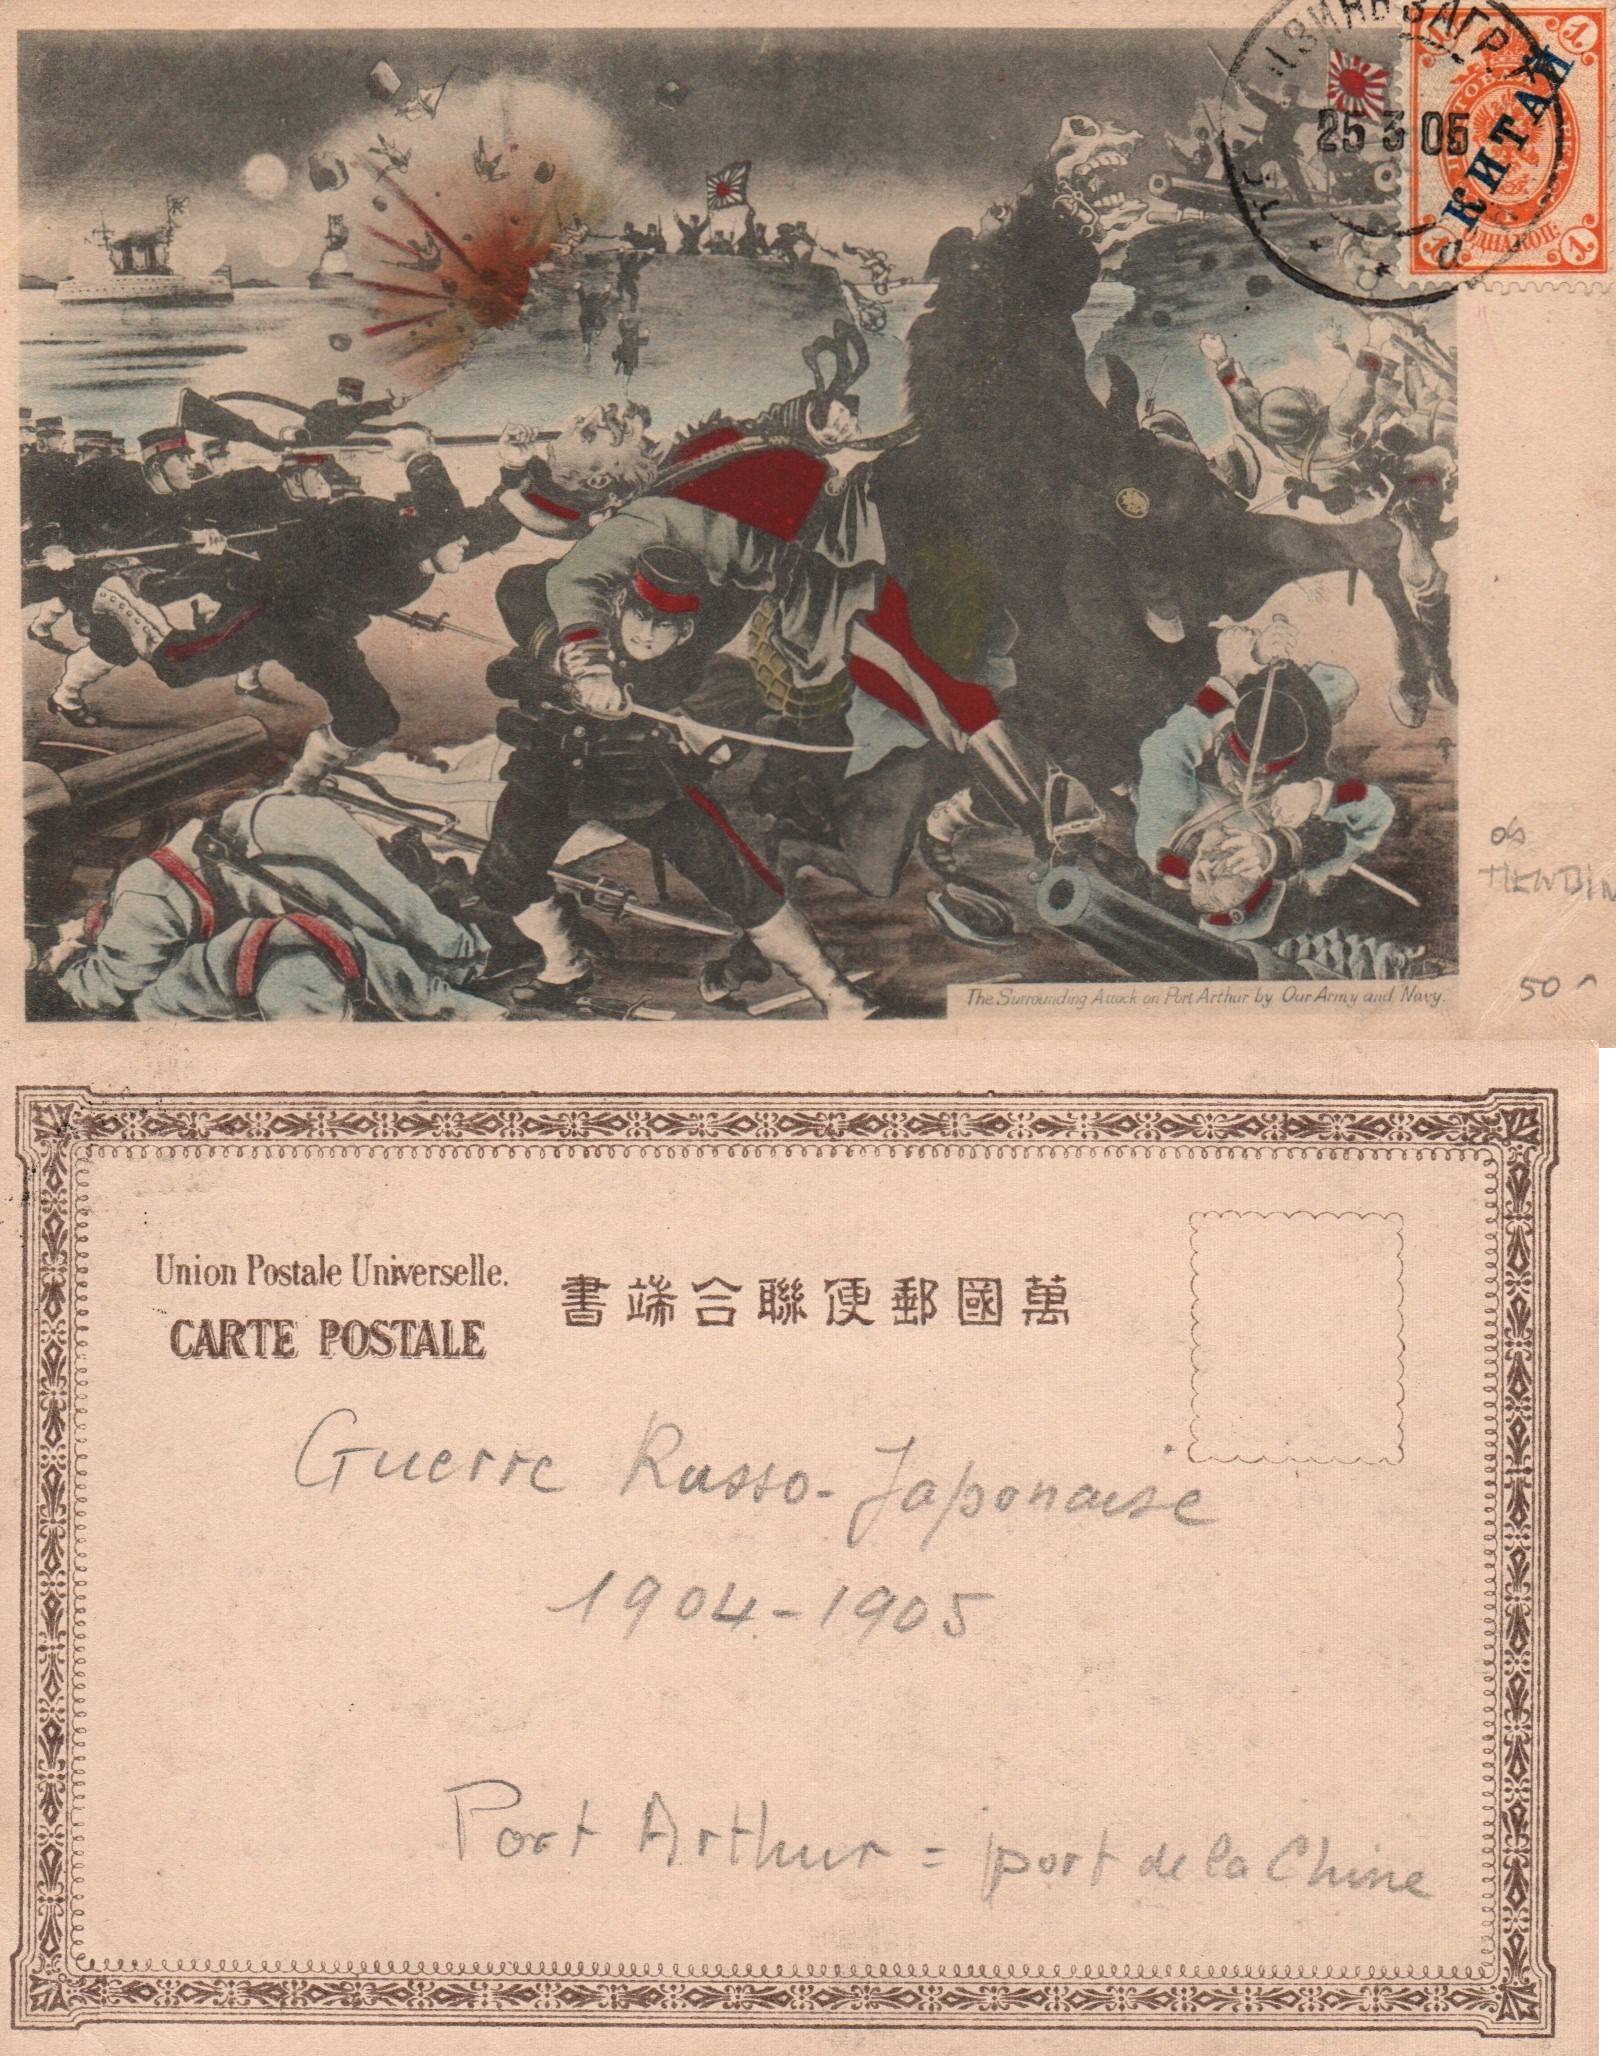 Russia Postal History - Offices in China. Scott 5001905 